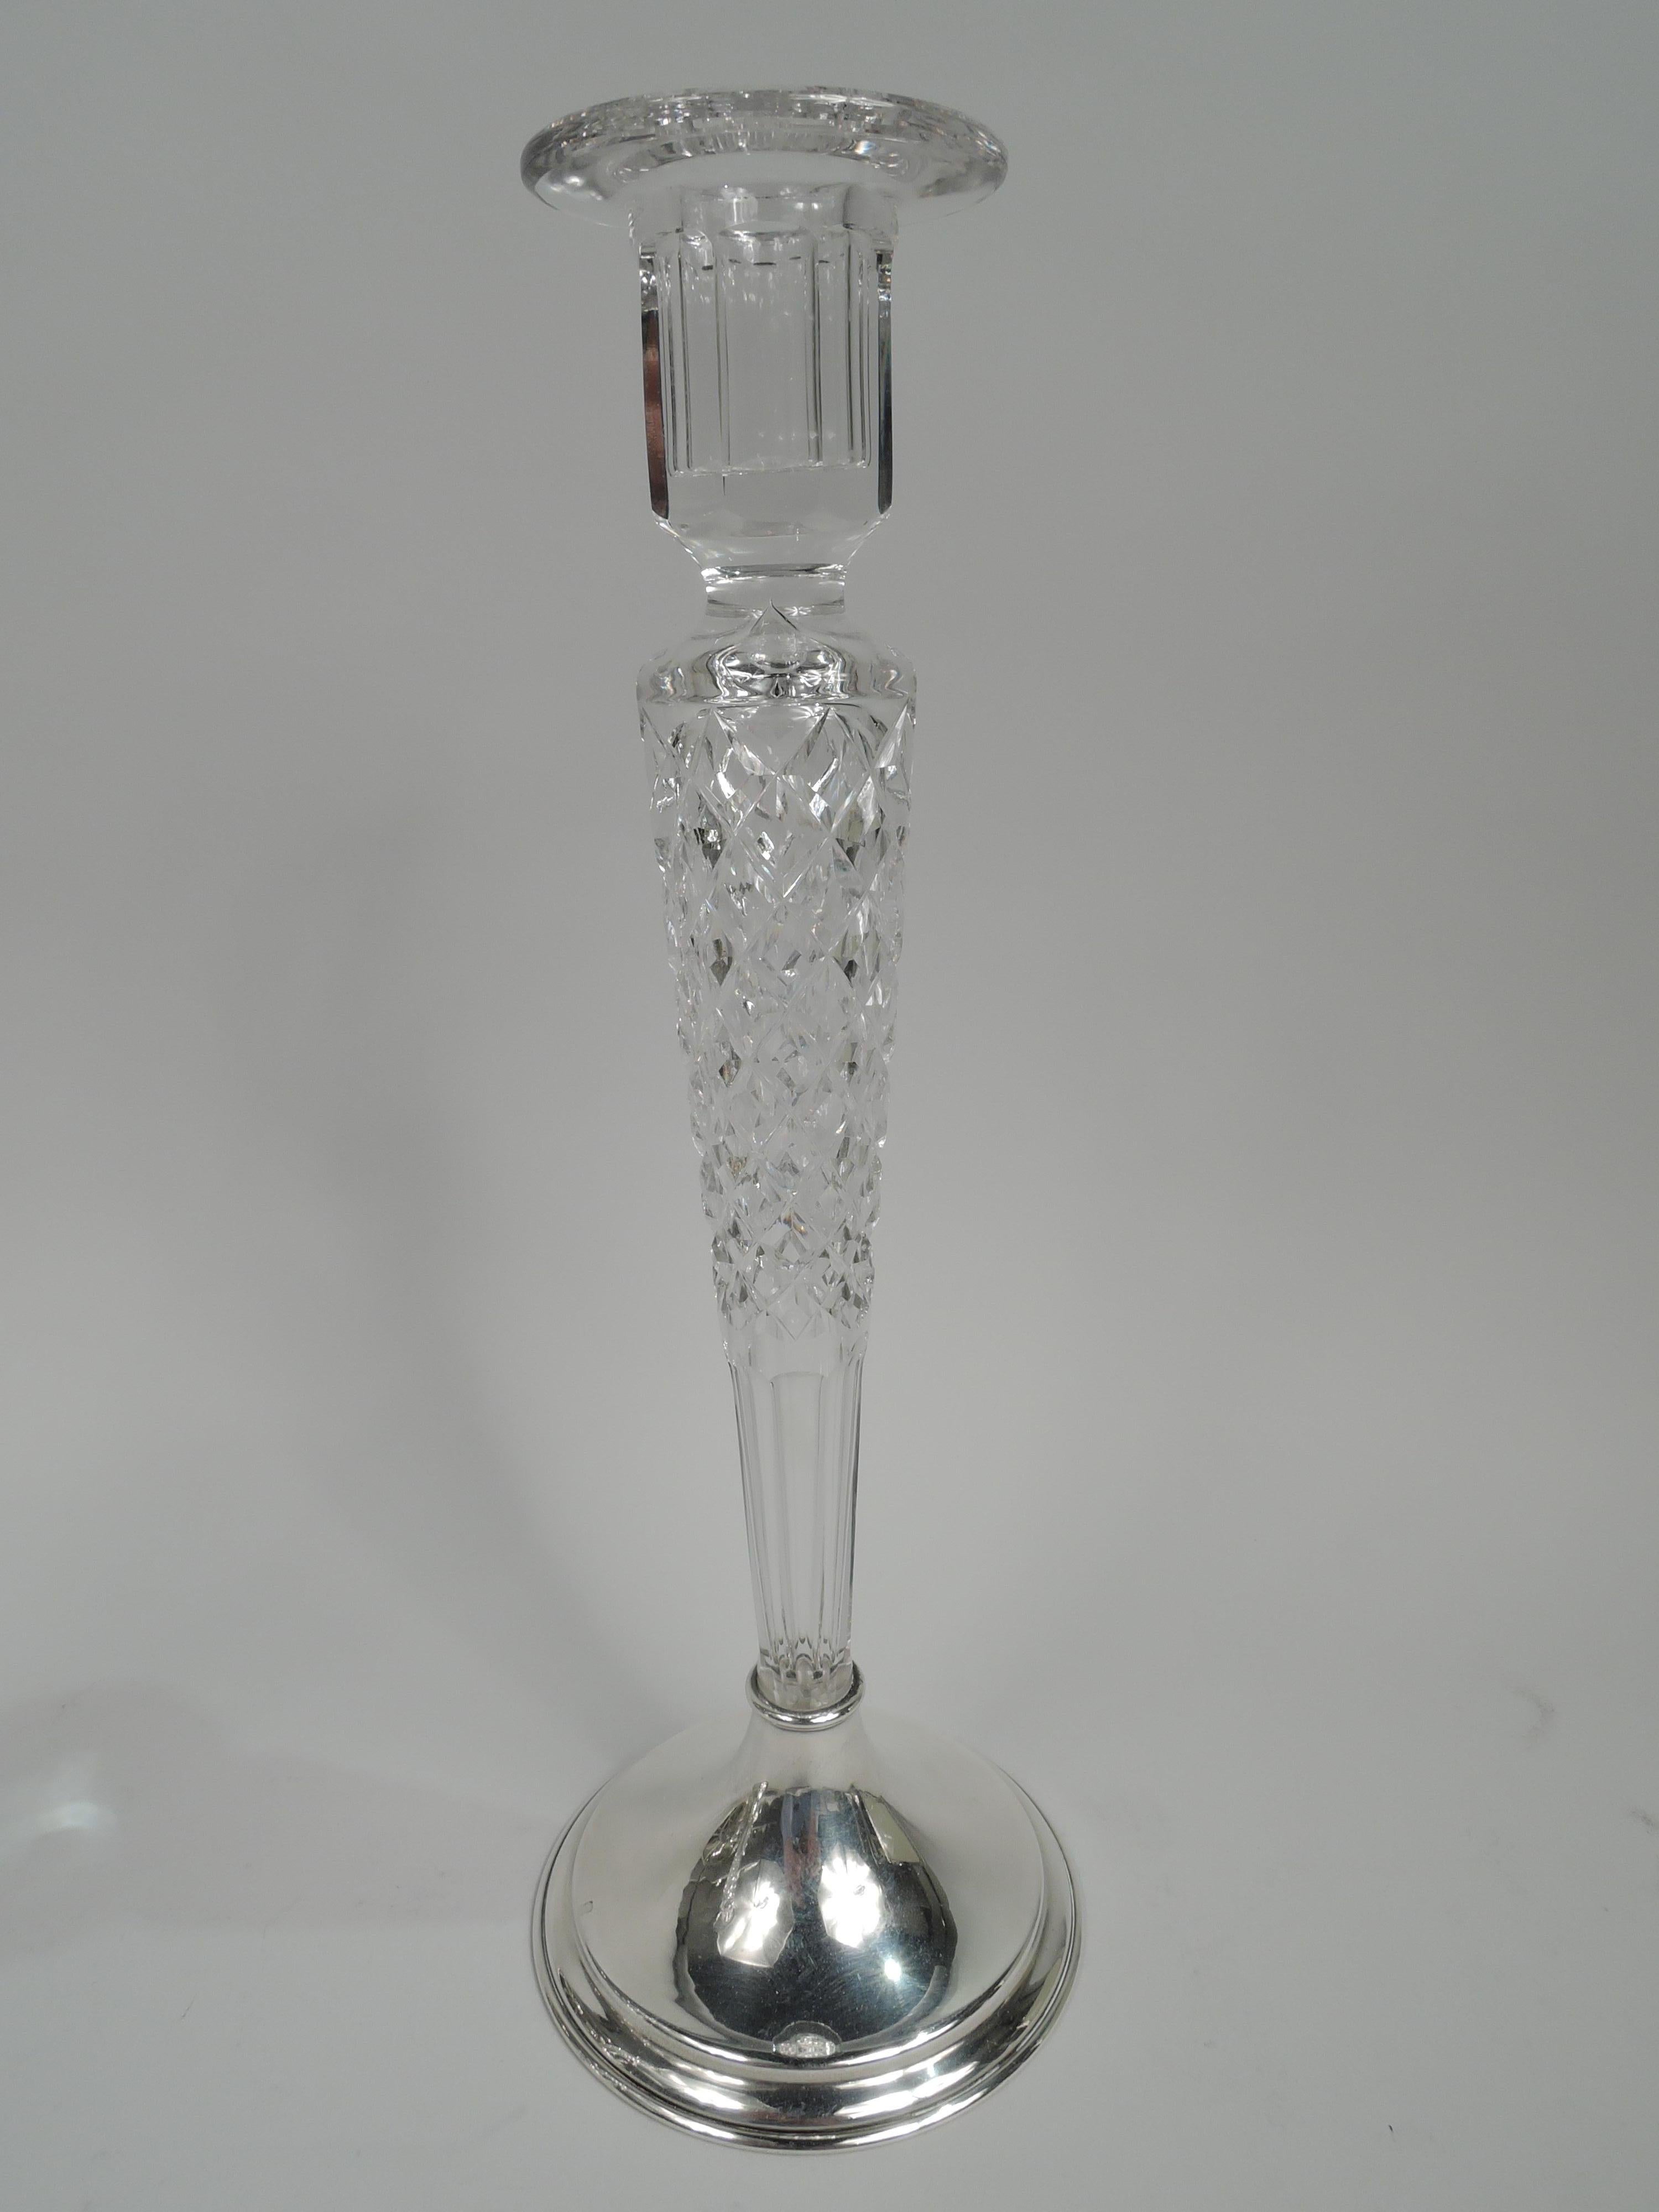 Pair of American Edwardian glass and sterling silver candlesticks, ca 1920. Each: Faceted glass socket with flat rim mounted to same tapering shaft with relief diaper and faceted base. Raised and sterling silver foot. Marked “S819 / Sterling / 58